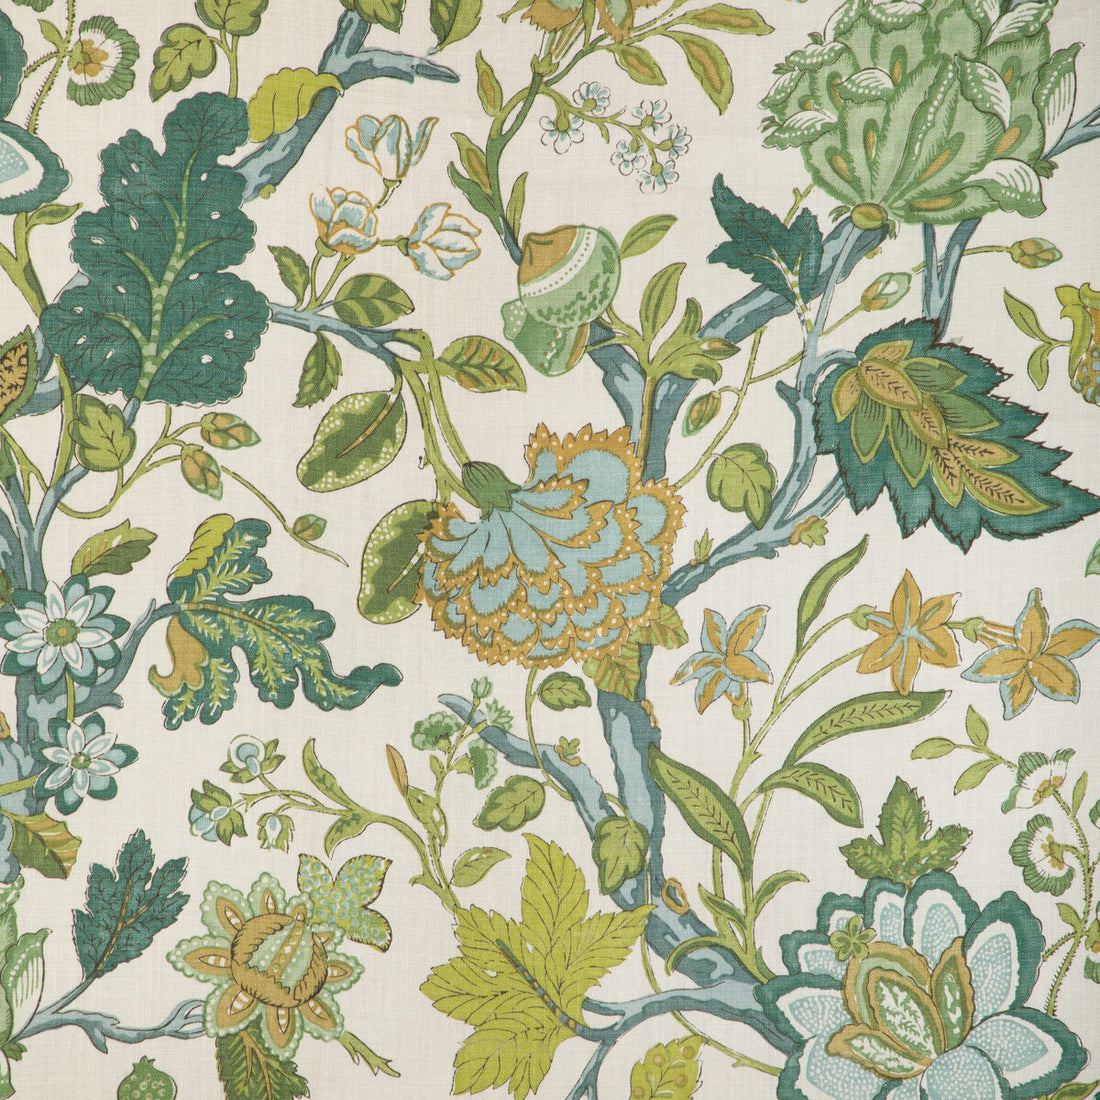 Hazelwood Print fabric in green color - pattern 2023121.335.0 - by Lee Jofa in the Lee Jofa 200 collection